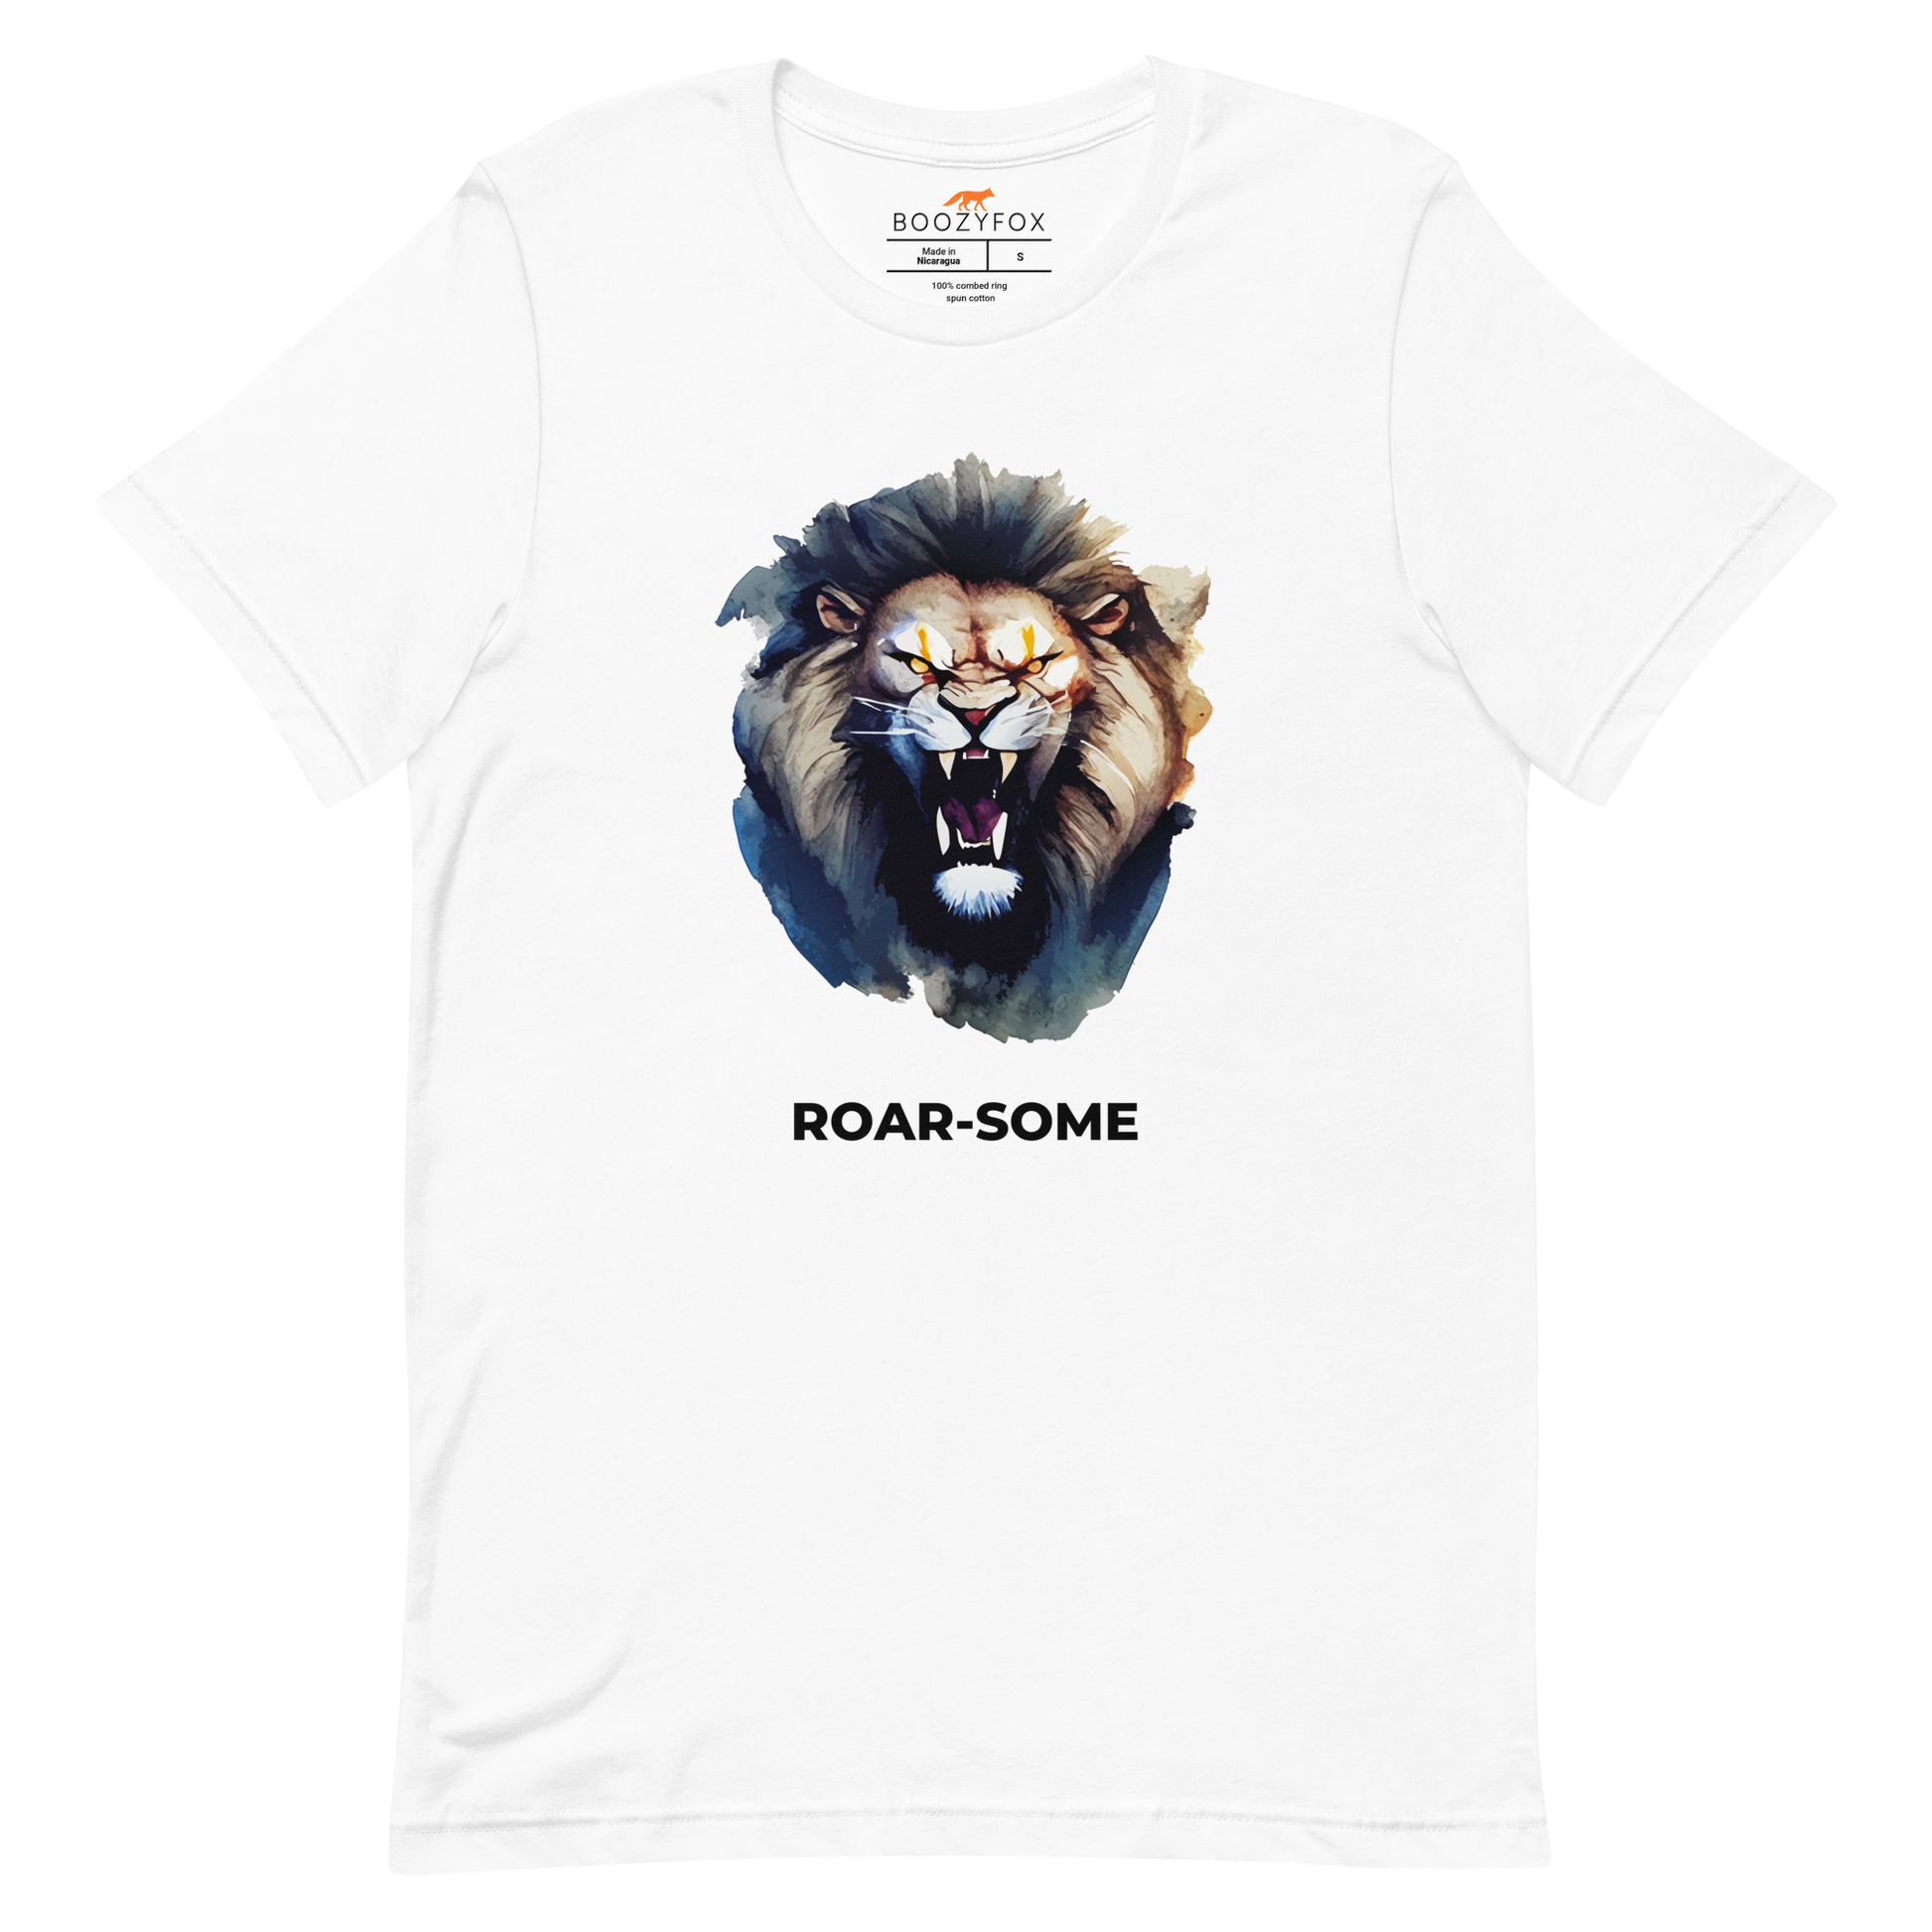 White Premium Lion Tee featuring a Roar-Some graphic on the chest - Cool Graphic Lion Tees - Boozy Fox